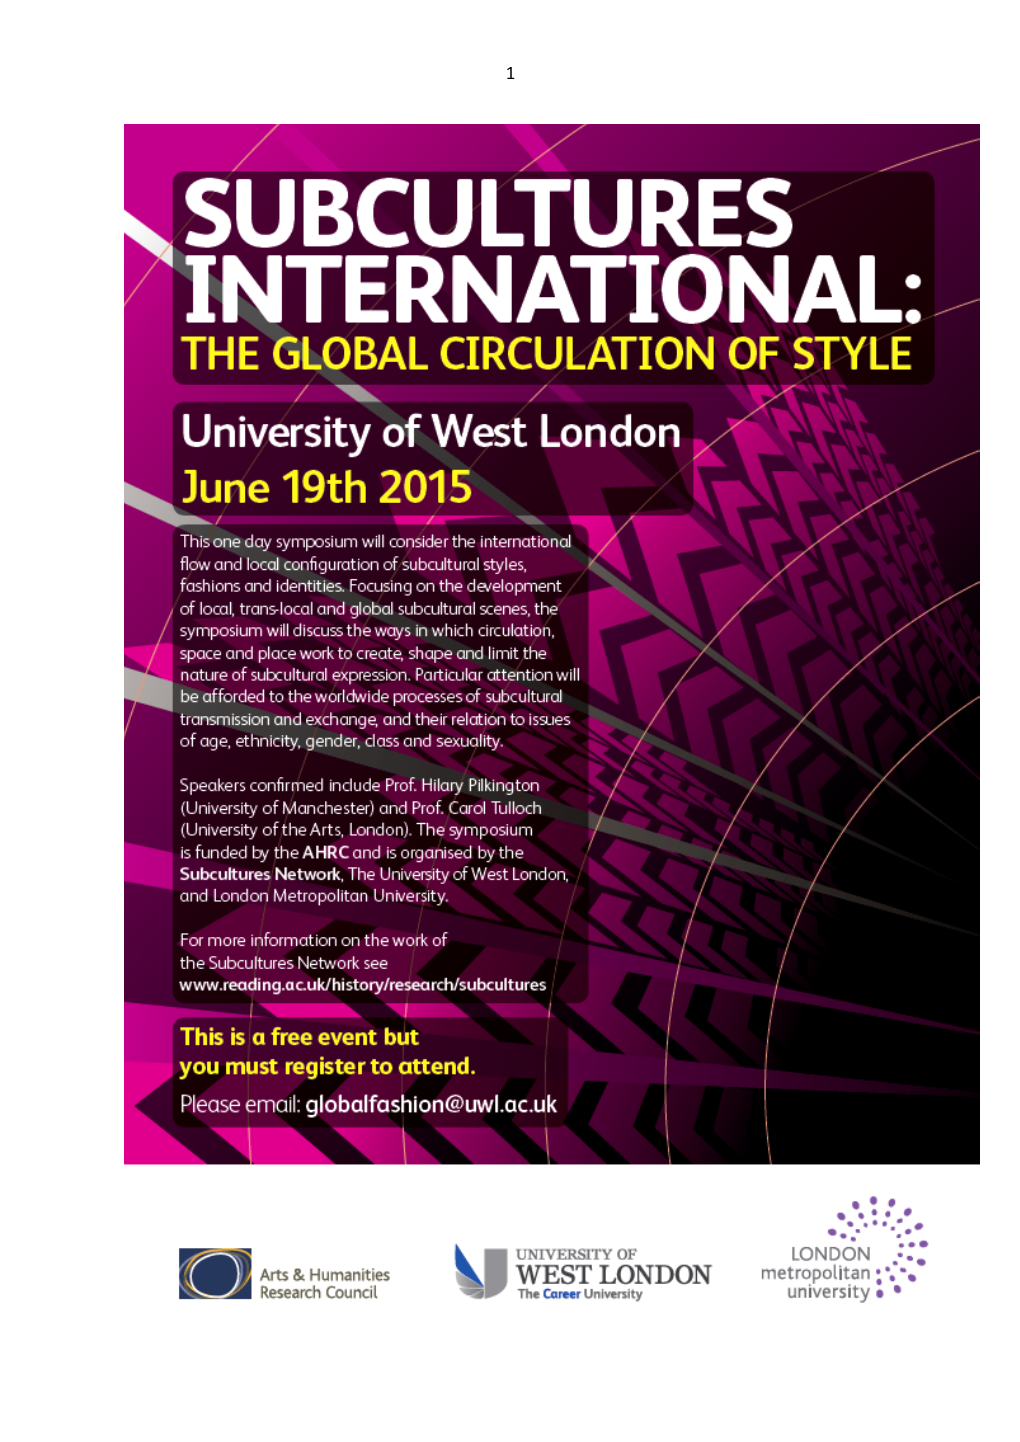 Here I Come From, Where I Got My Knowledge of the Road and the Flow From’: Grime As an Expression of the Local and the Global in Postcolonial London